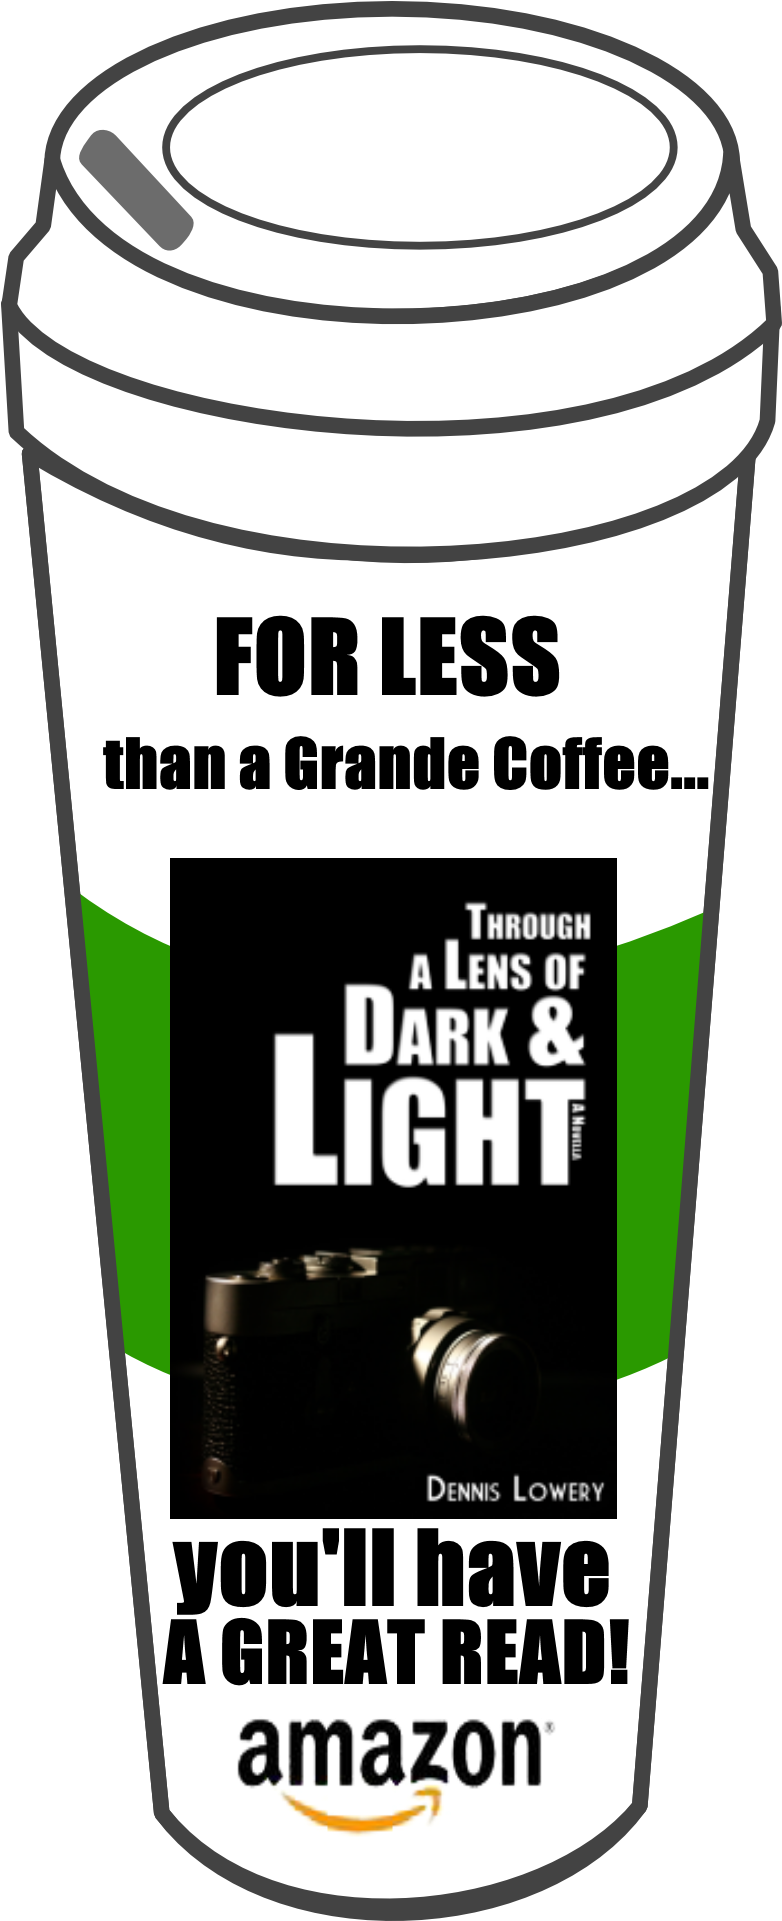 For Less Than A Grande Coffee You'll Have A Great Read - Two Tales Of Dark & Light [book] (960x1920)